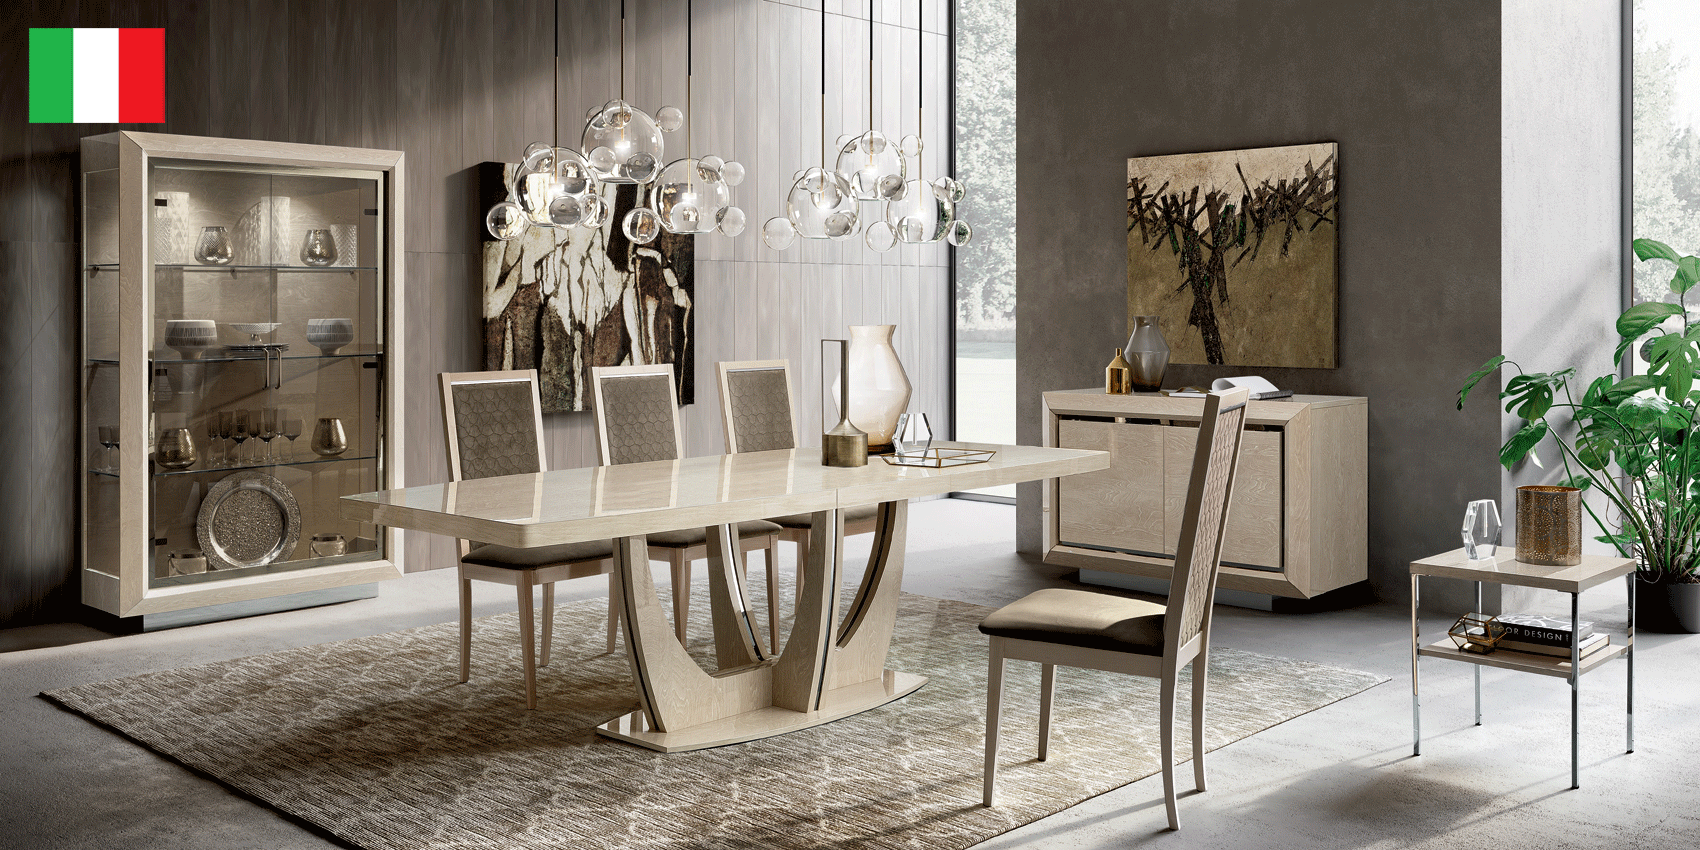 Brands Camel Modum Collection, Italy Elite Dining Ivory with Ambra “Rombi” Chairs